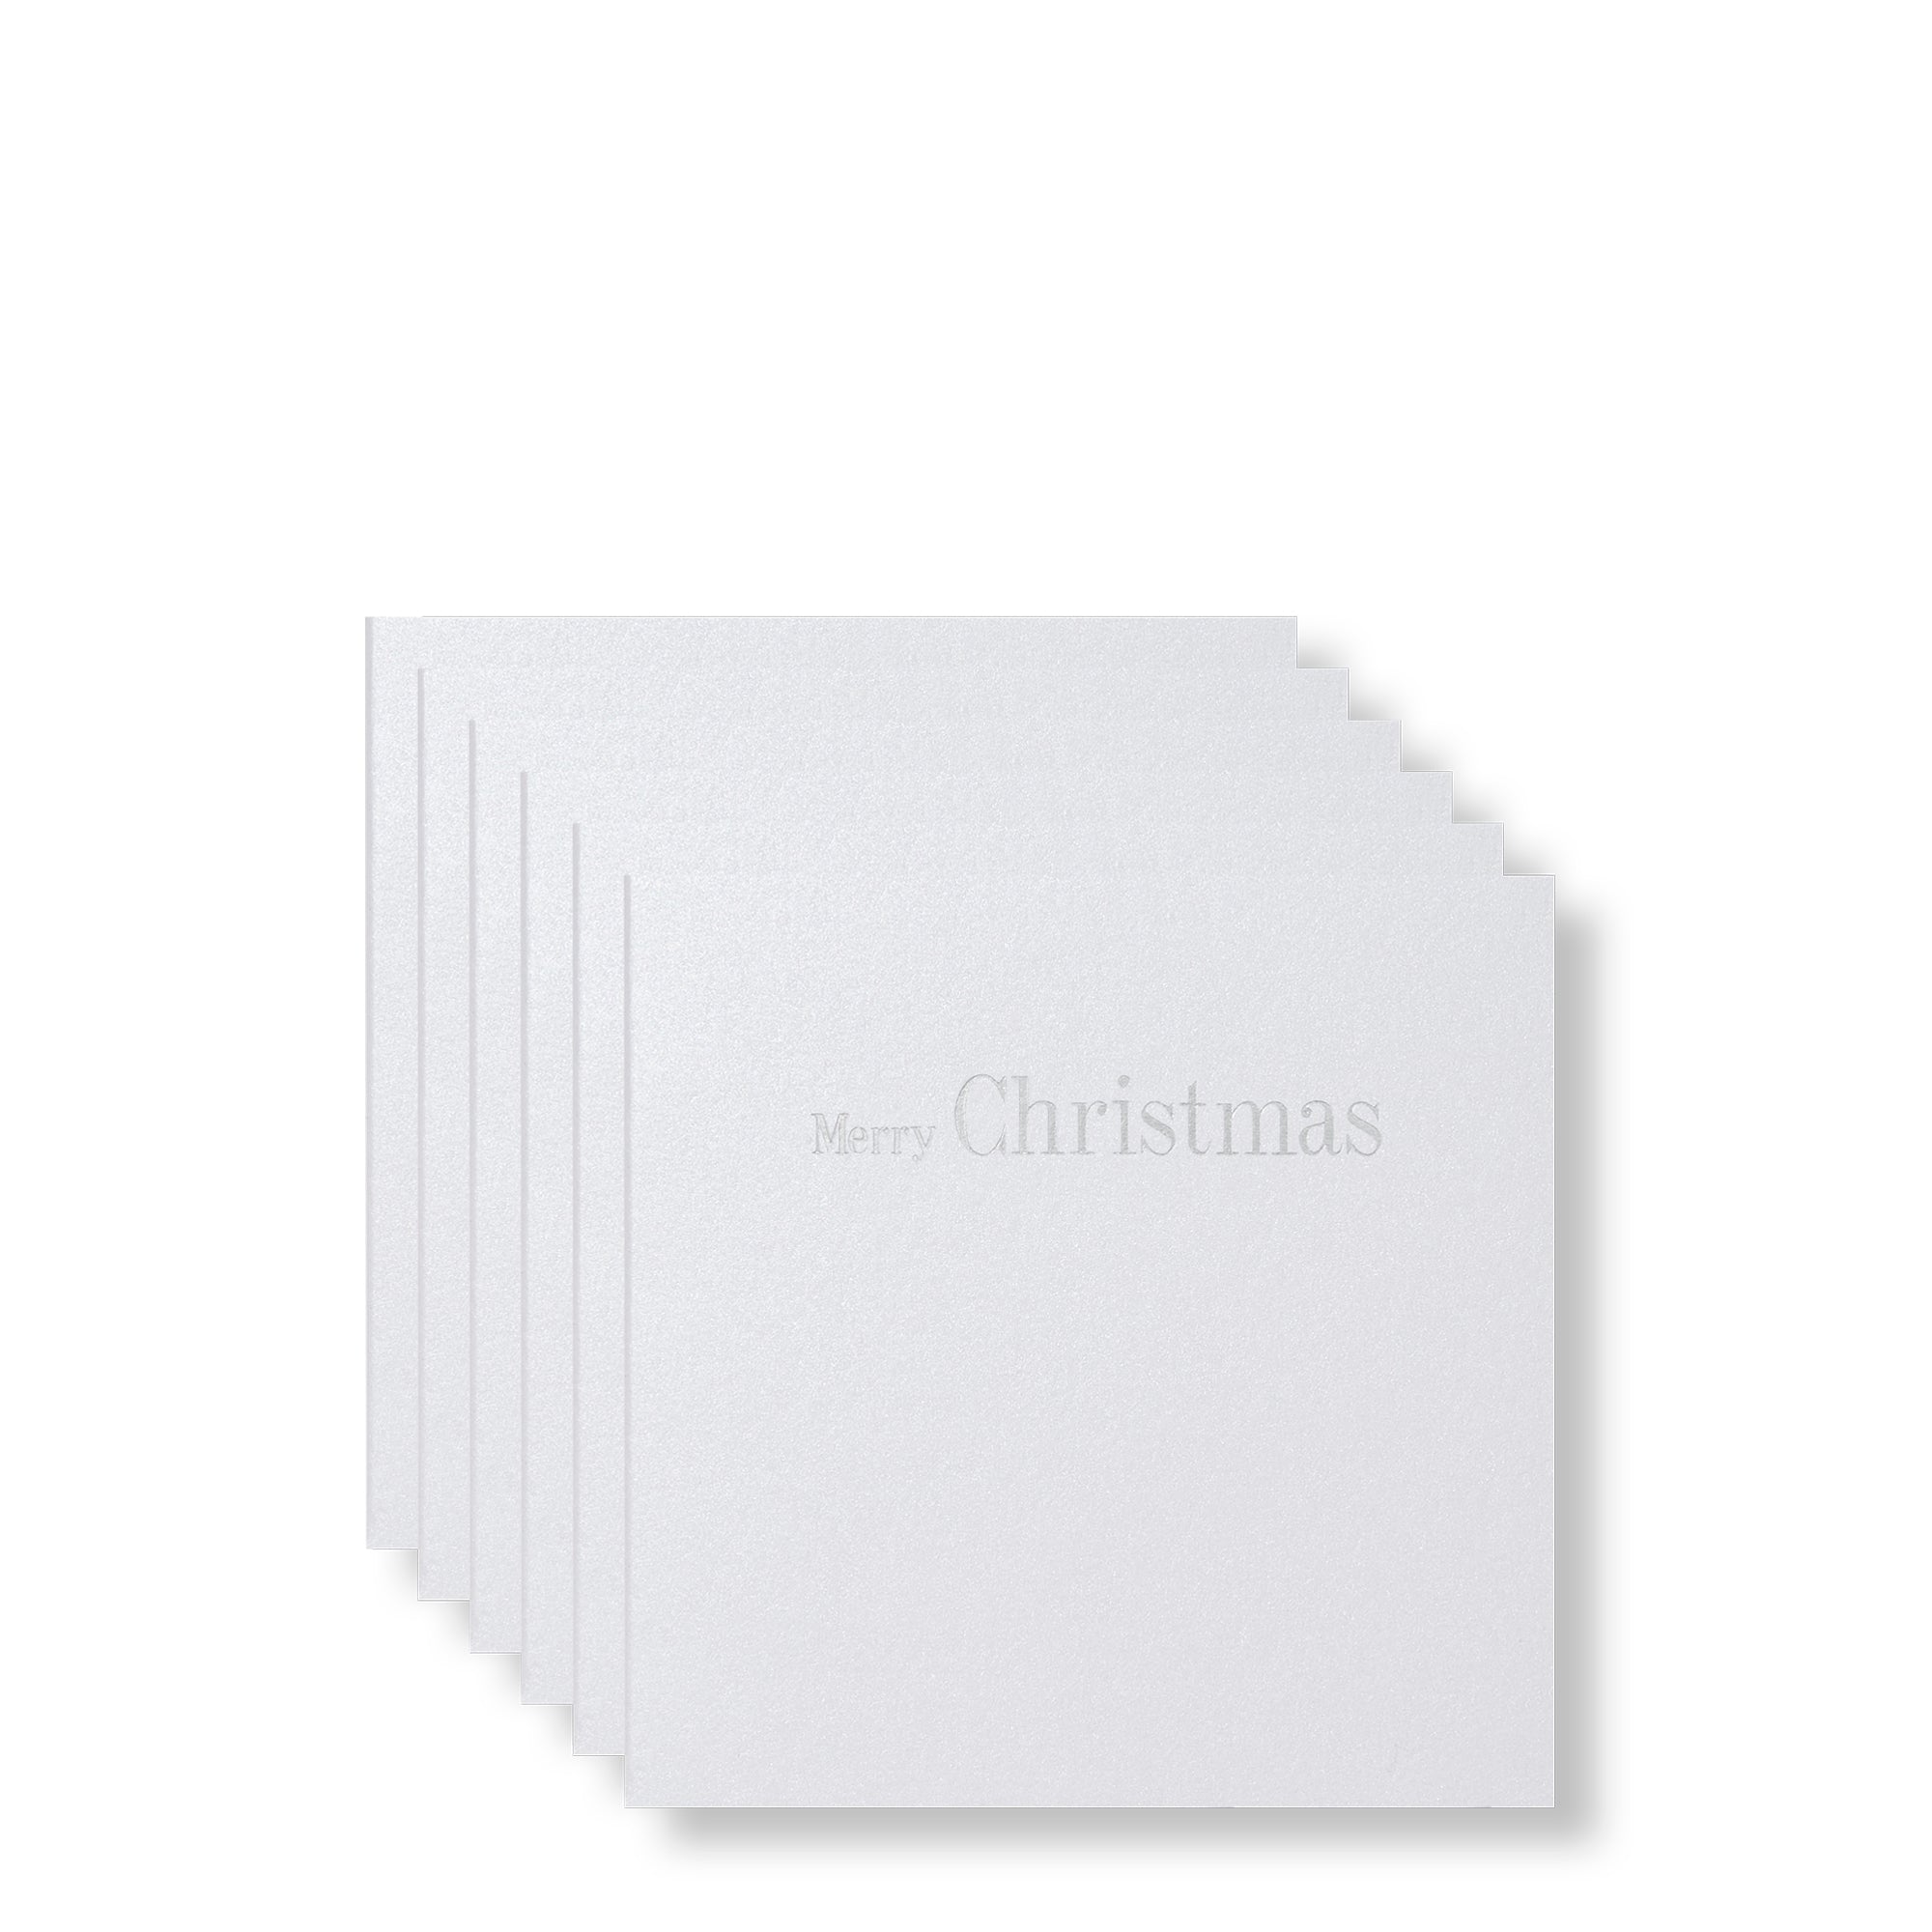 Merry Christmas Silver Foiled Mini Cards, Set of 6